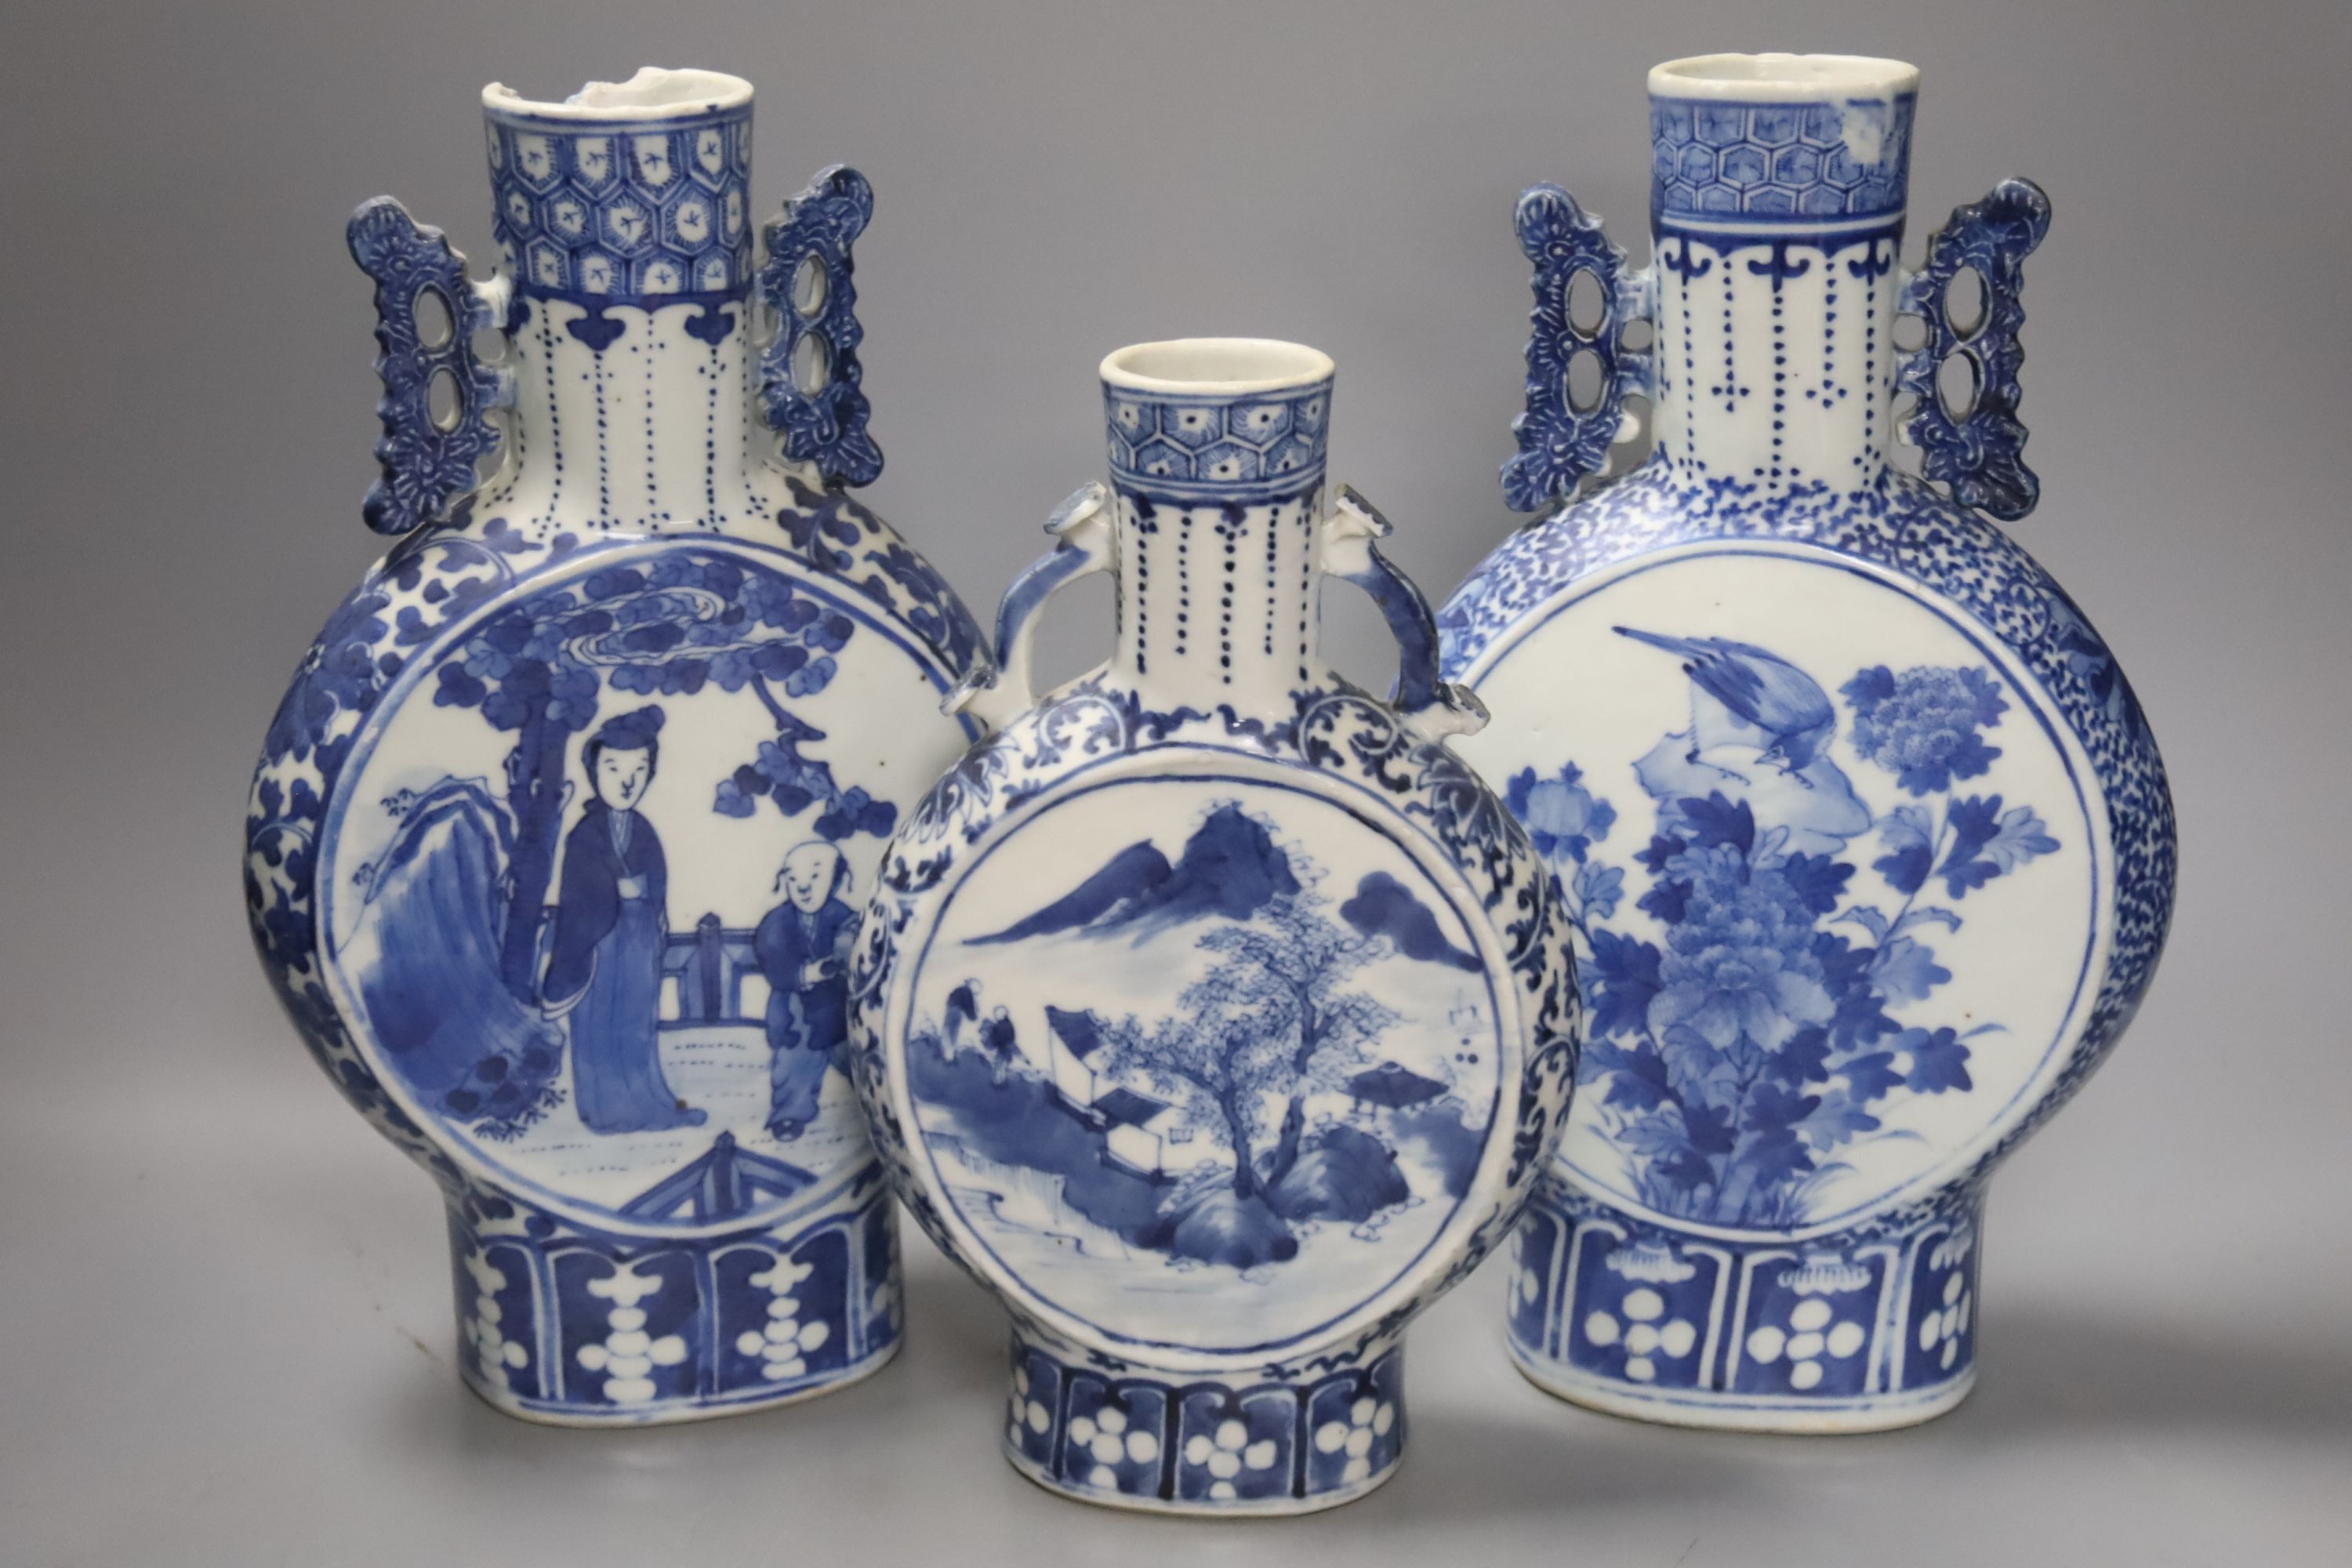 Three 19th century Chinese blue and white Moon flasks, tallest 31 cms. - Image 2 of 4